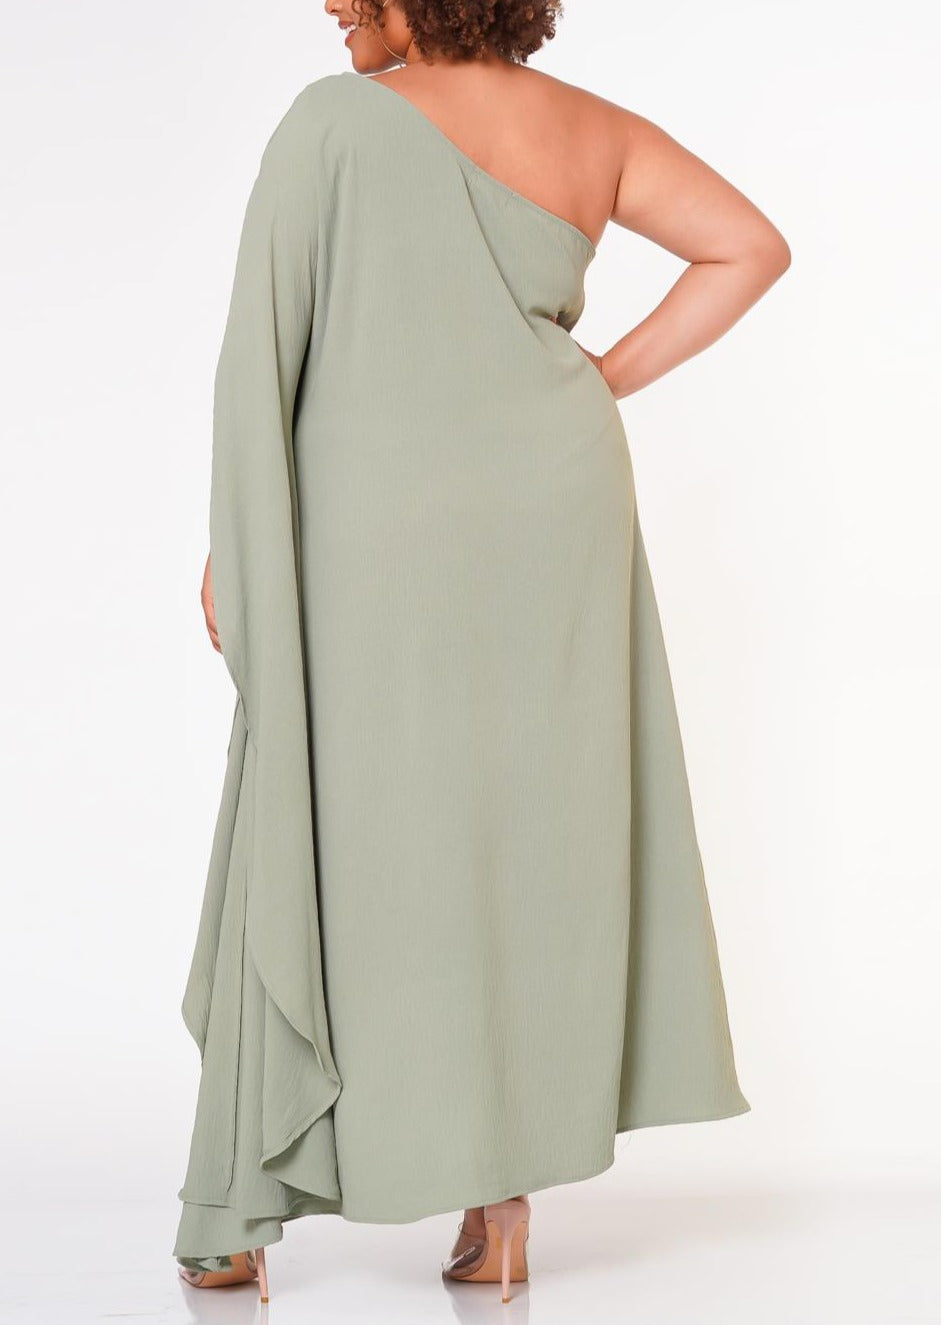 Hi Curvy Plus Size Women One Shoulder Maxi Flare Dress Made in USA